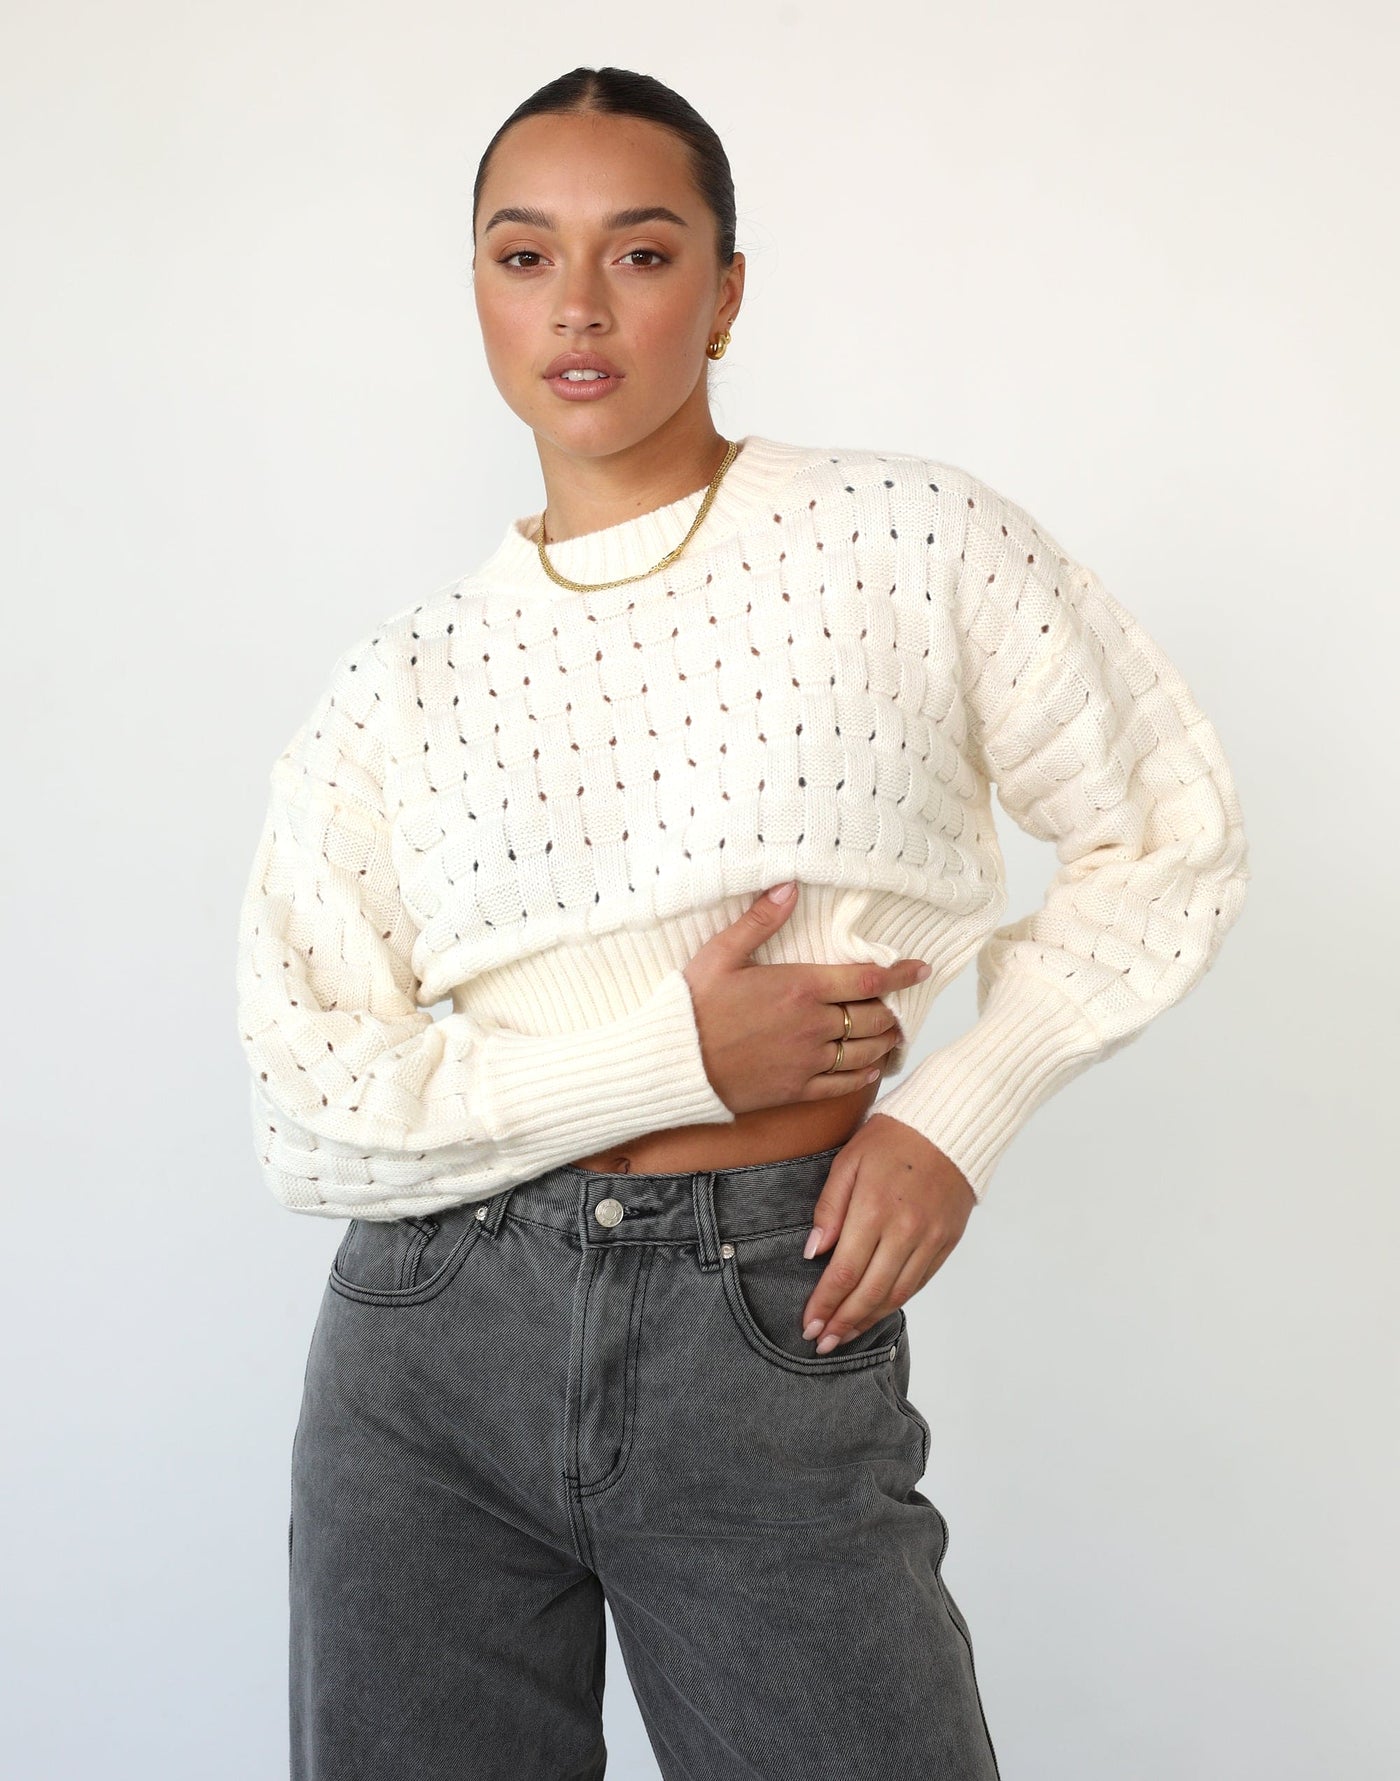 Rivera Jumper (Cream) - Cropped Weave Knit Detail Jumper - Women's Tops - Charcoal Clothing